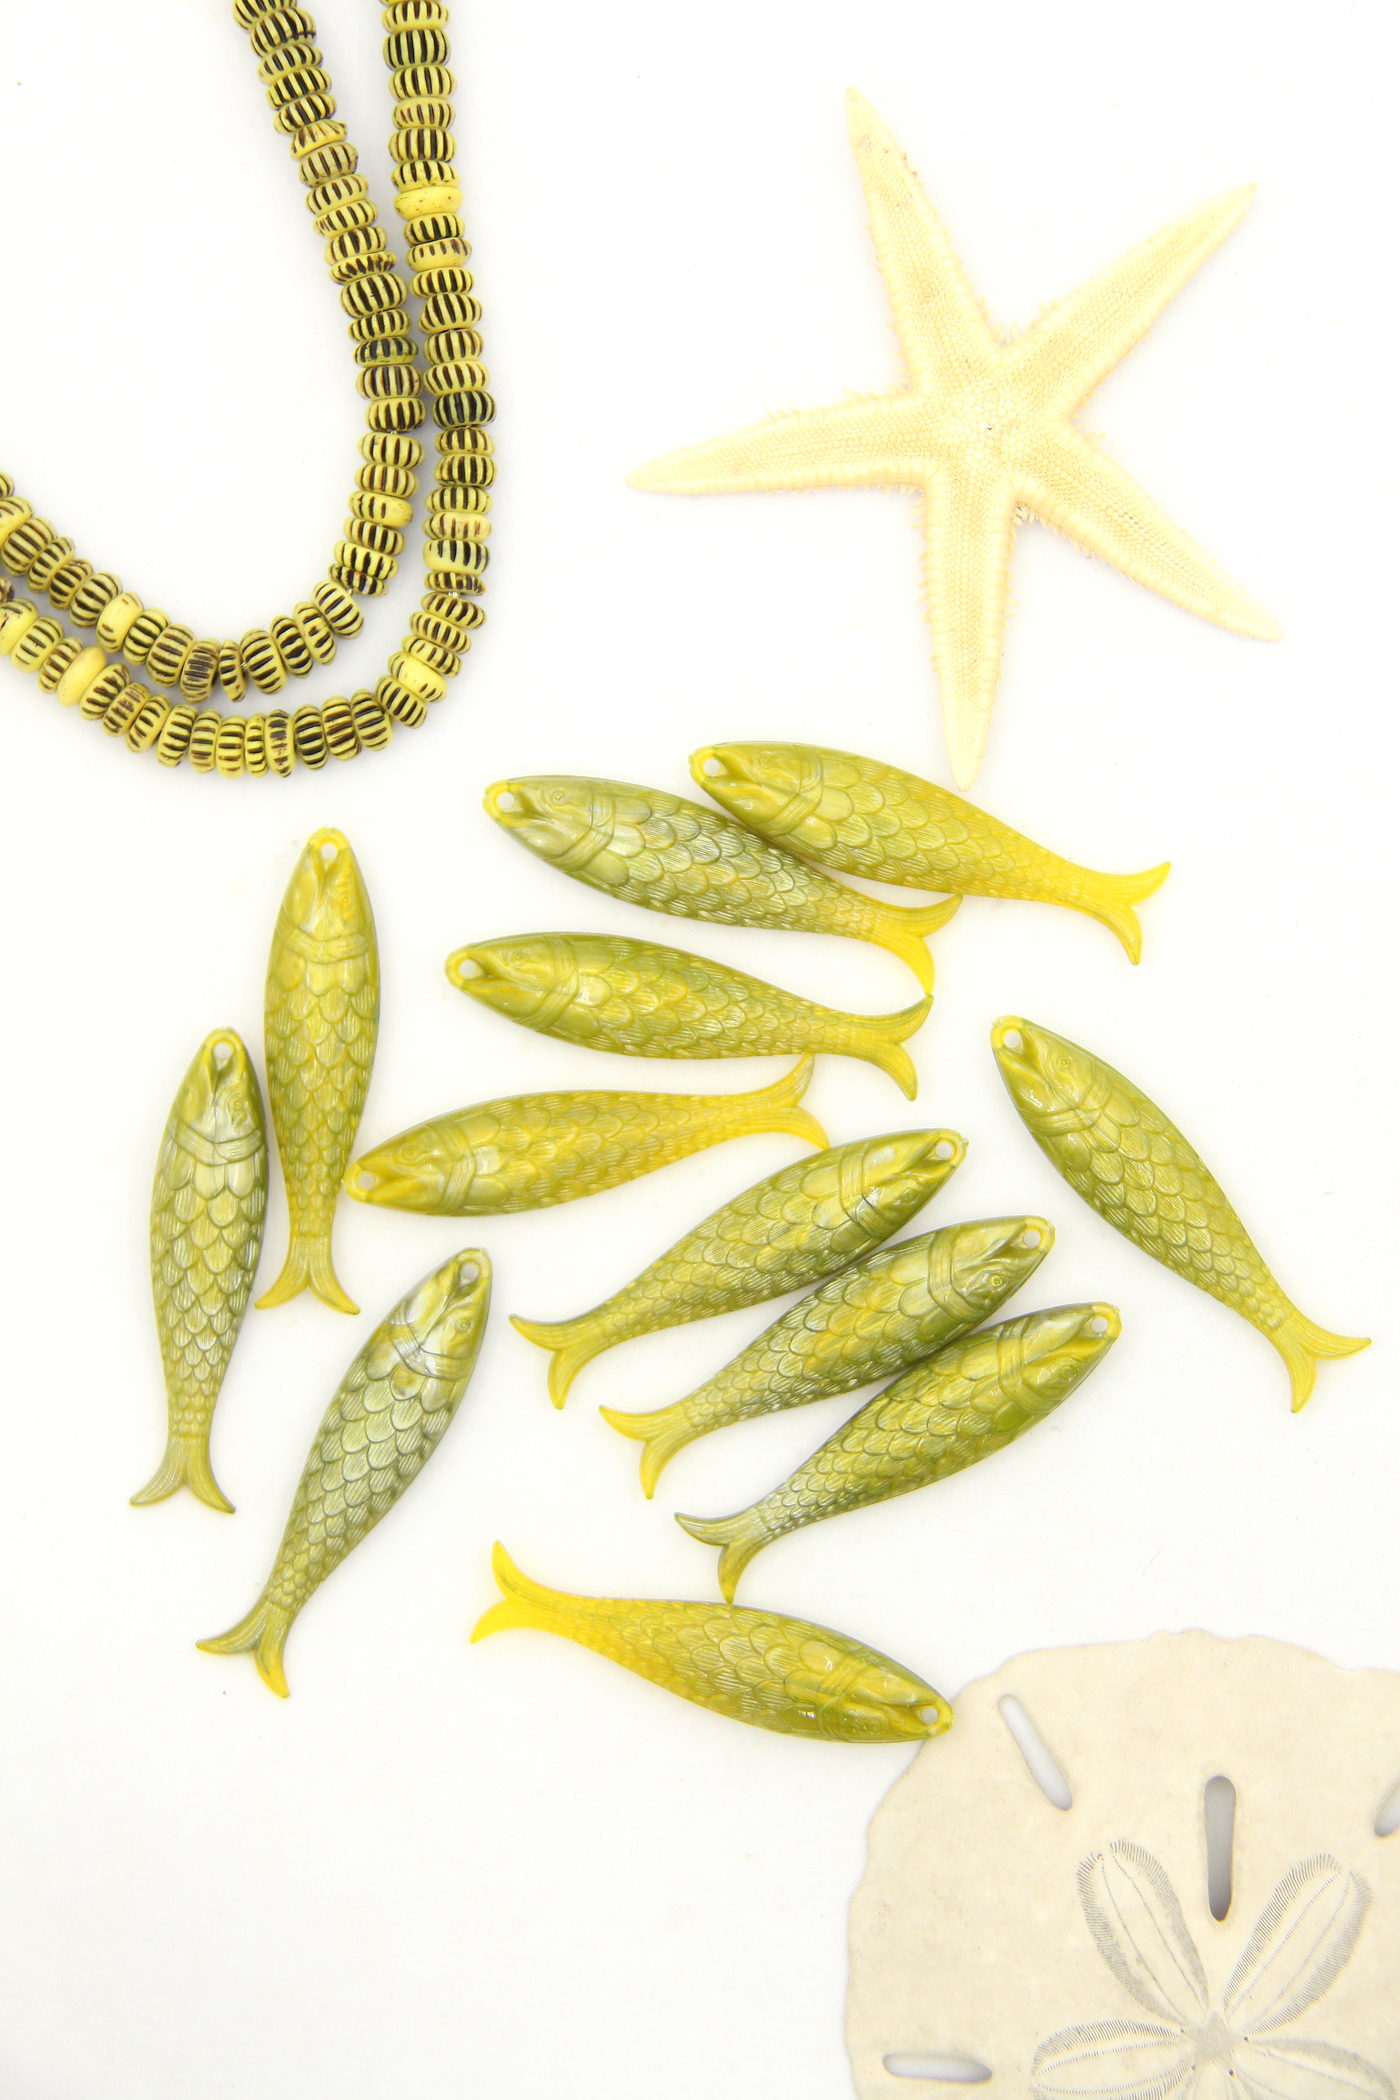 Golden Olive Fish Charm, German Resin, 48mm, 1 Pendant for making mermaid jewelry 